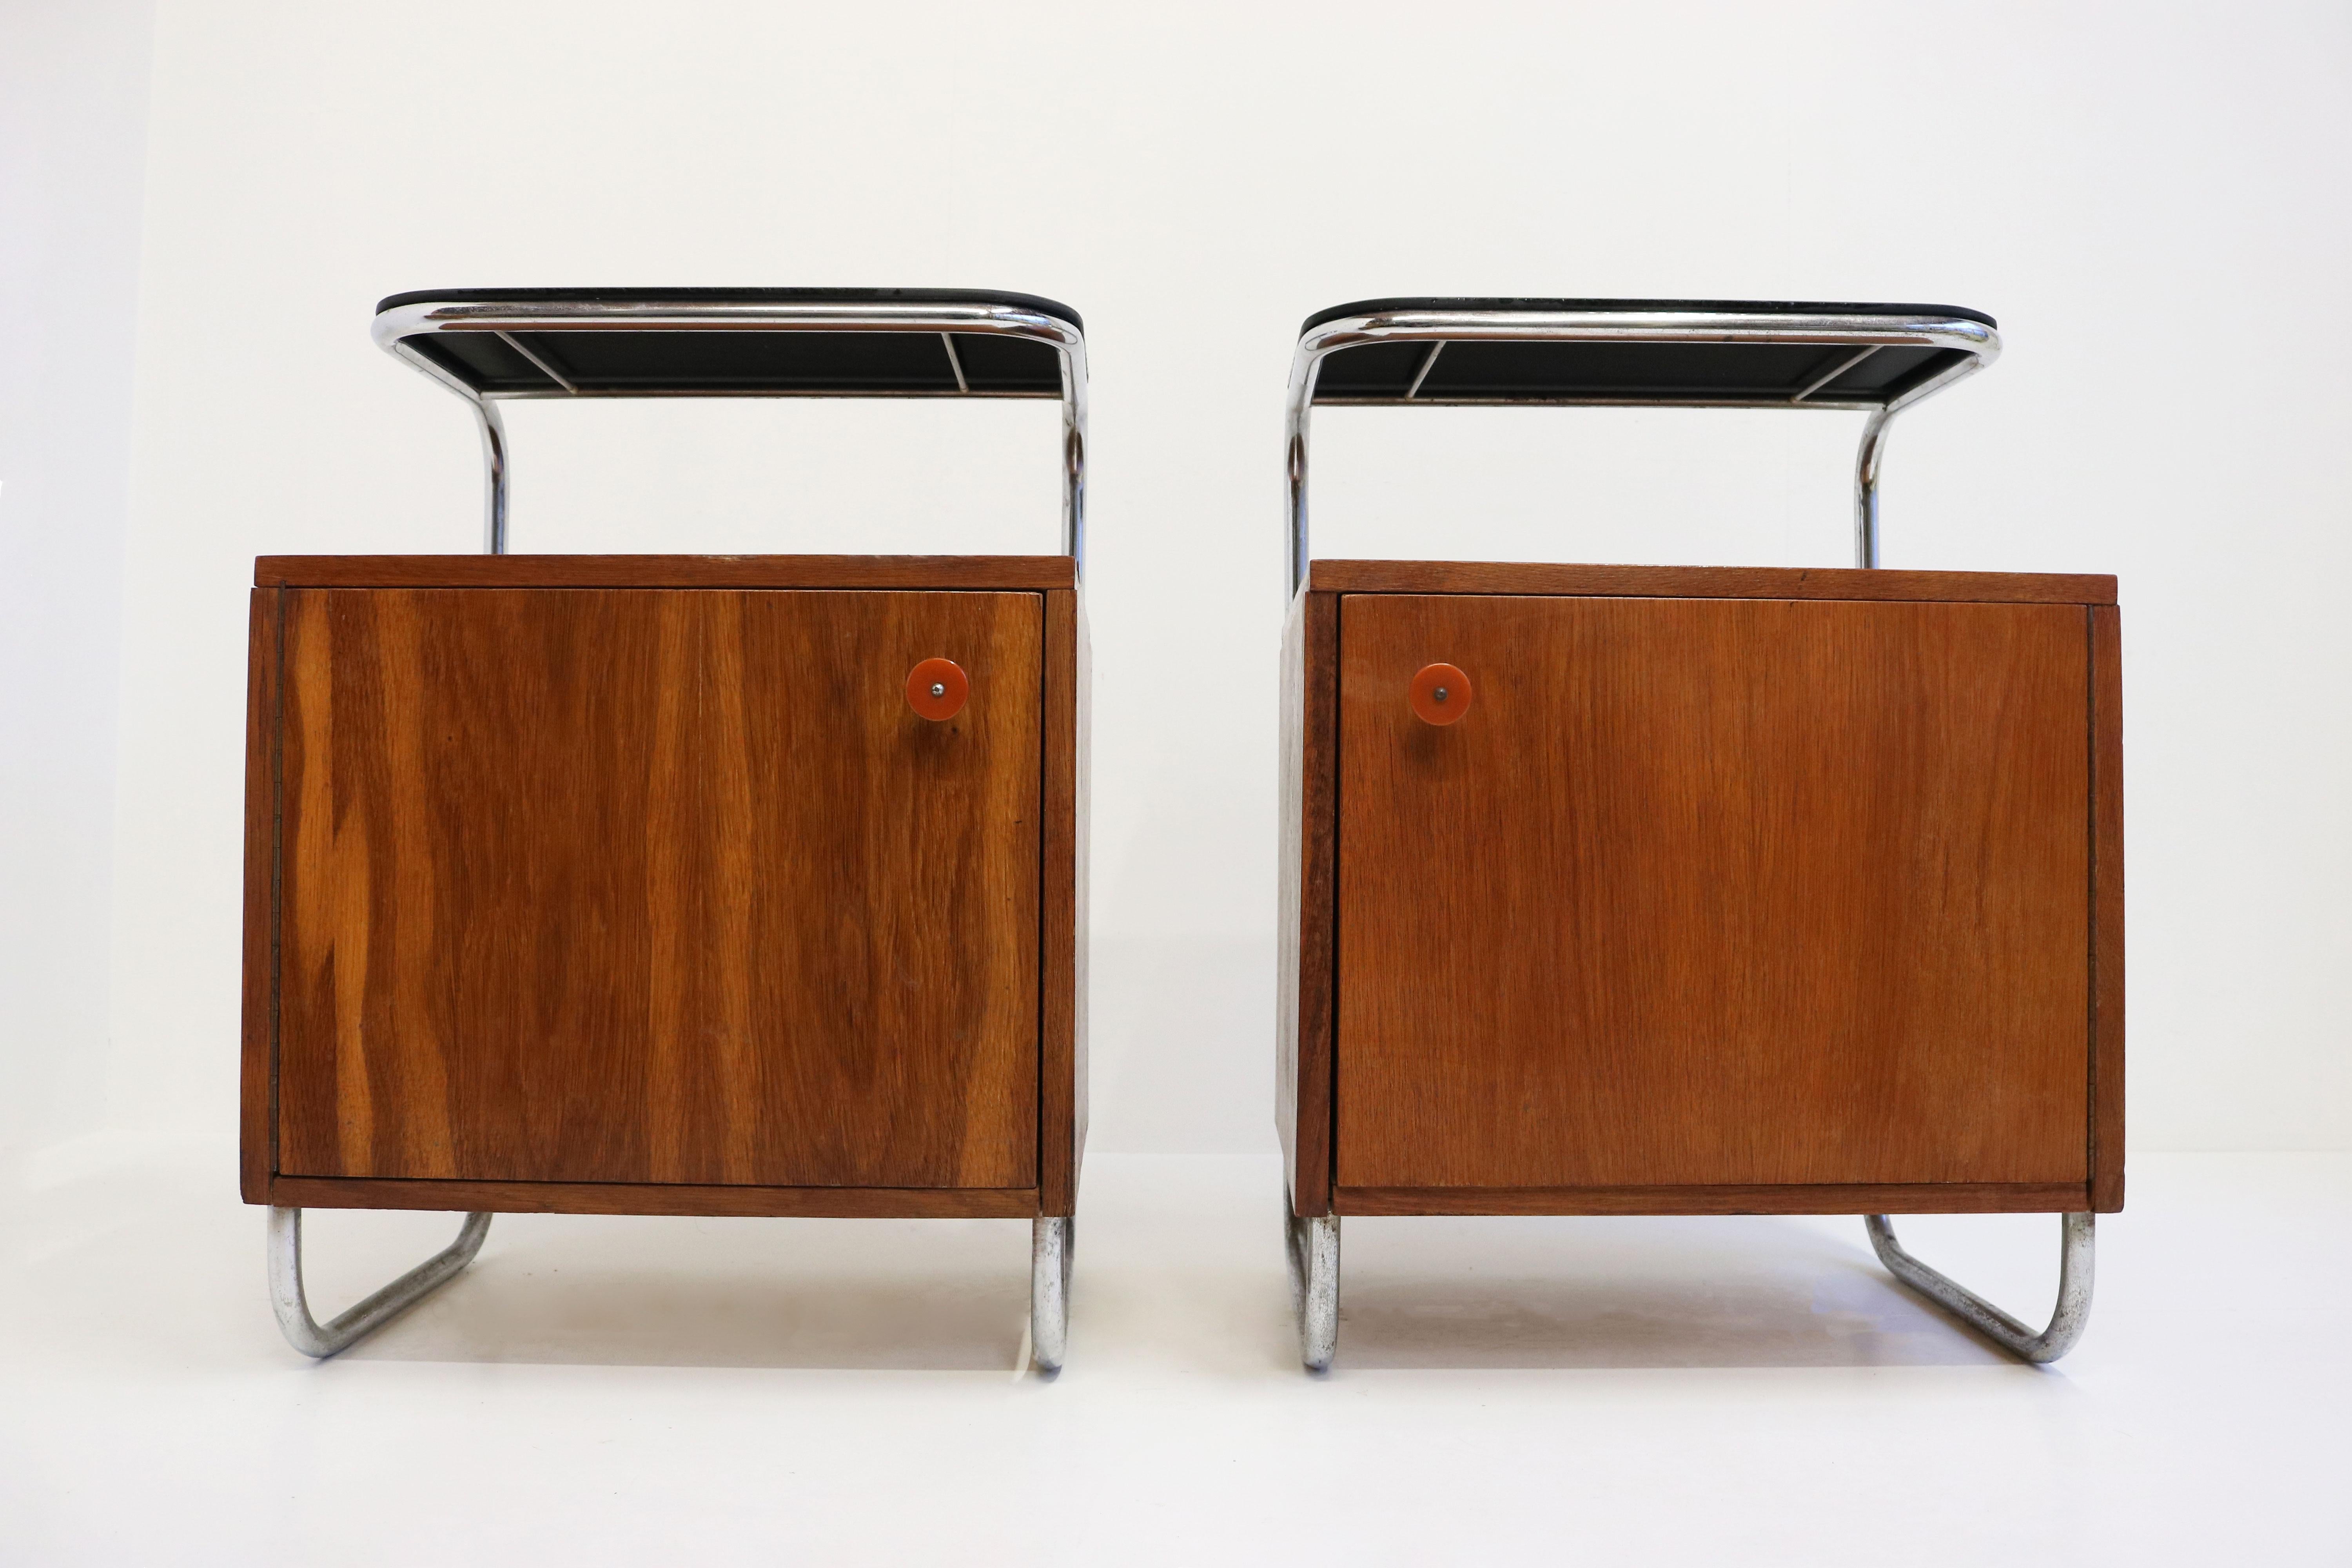 Mid-20th Century Pair of Art Deco Bauhaus Bedside Tables / Nightstands 1930 Chrome Black Glass 